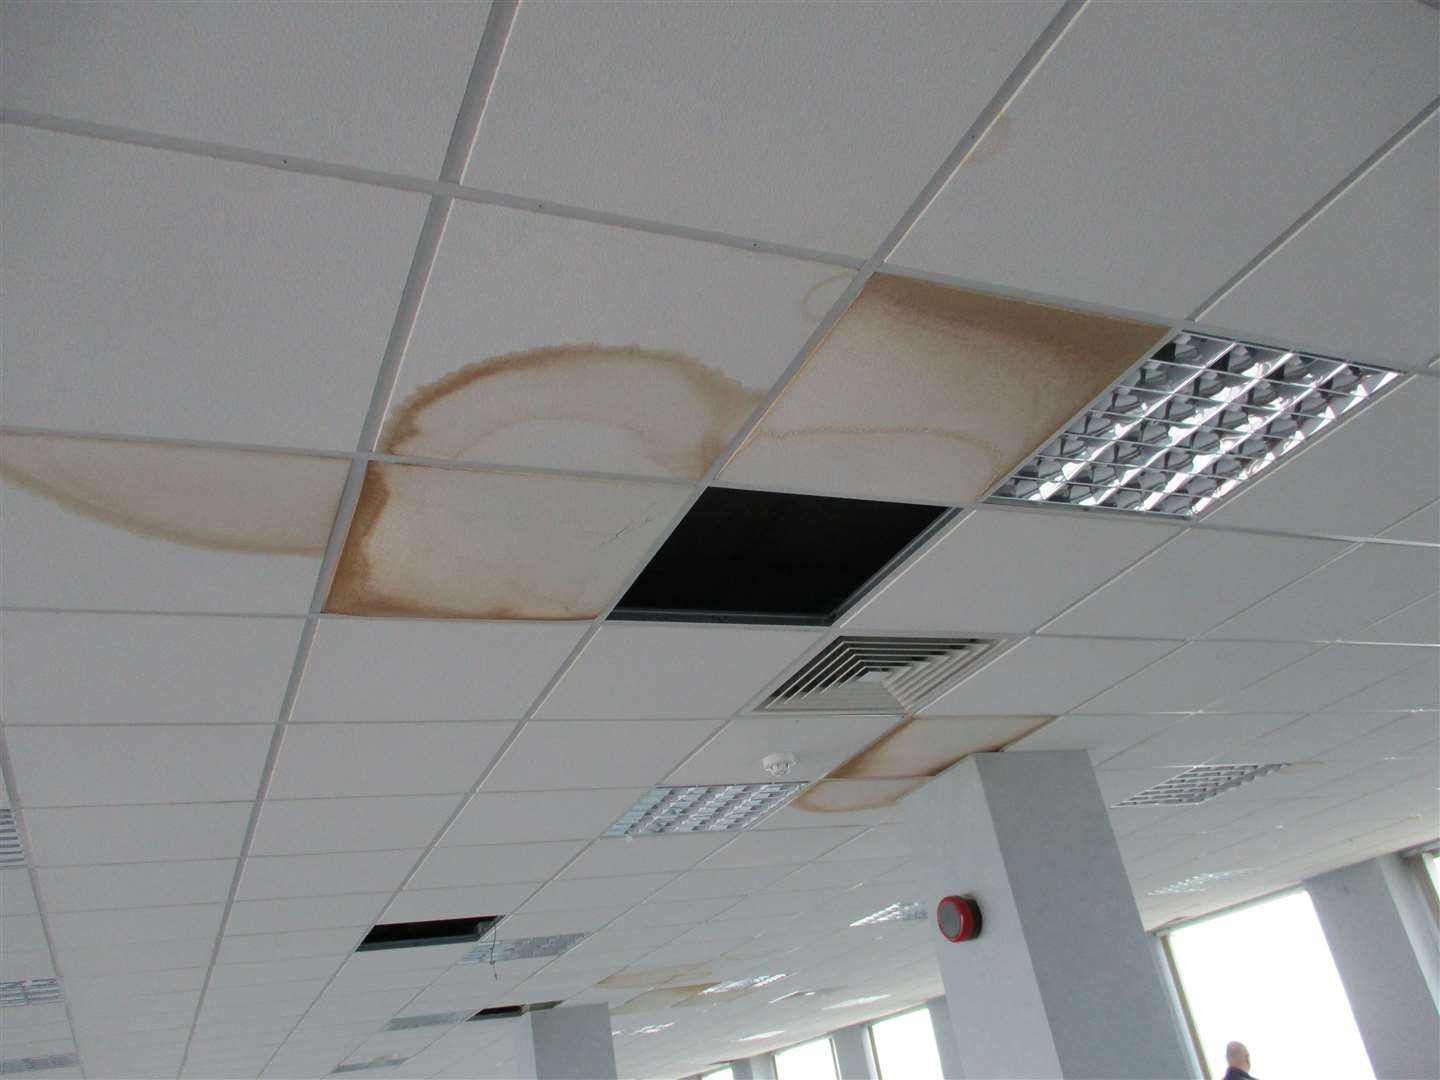 The roof on one of the floors is in need of some TLC. Picture: Medway Council